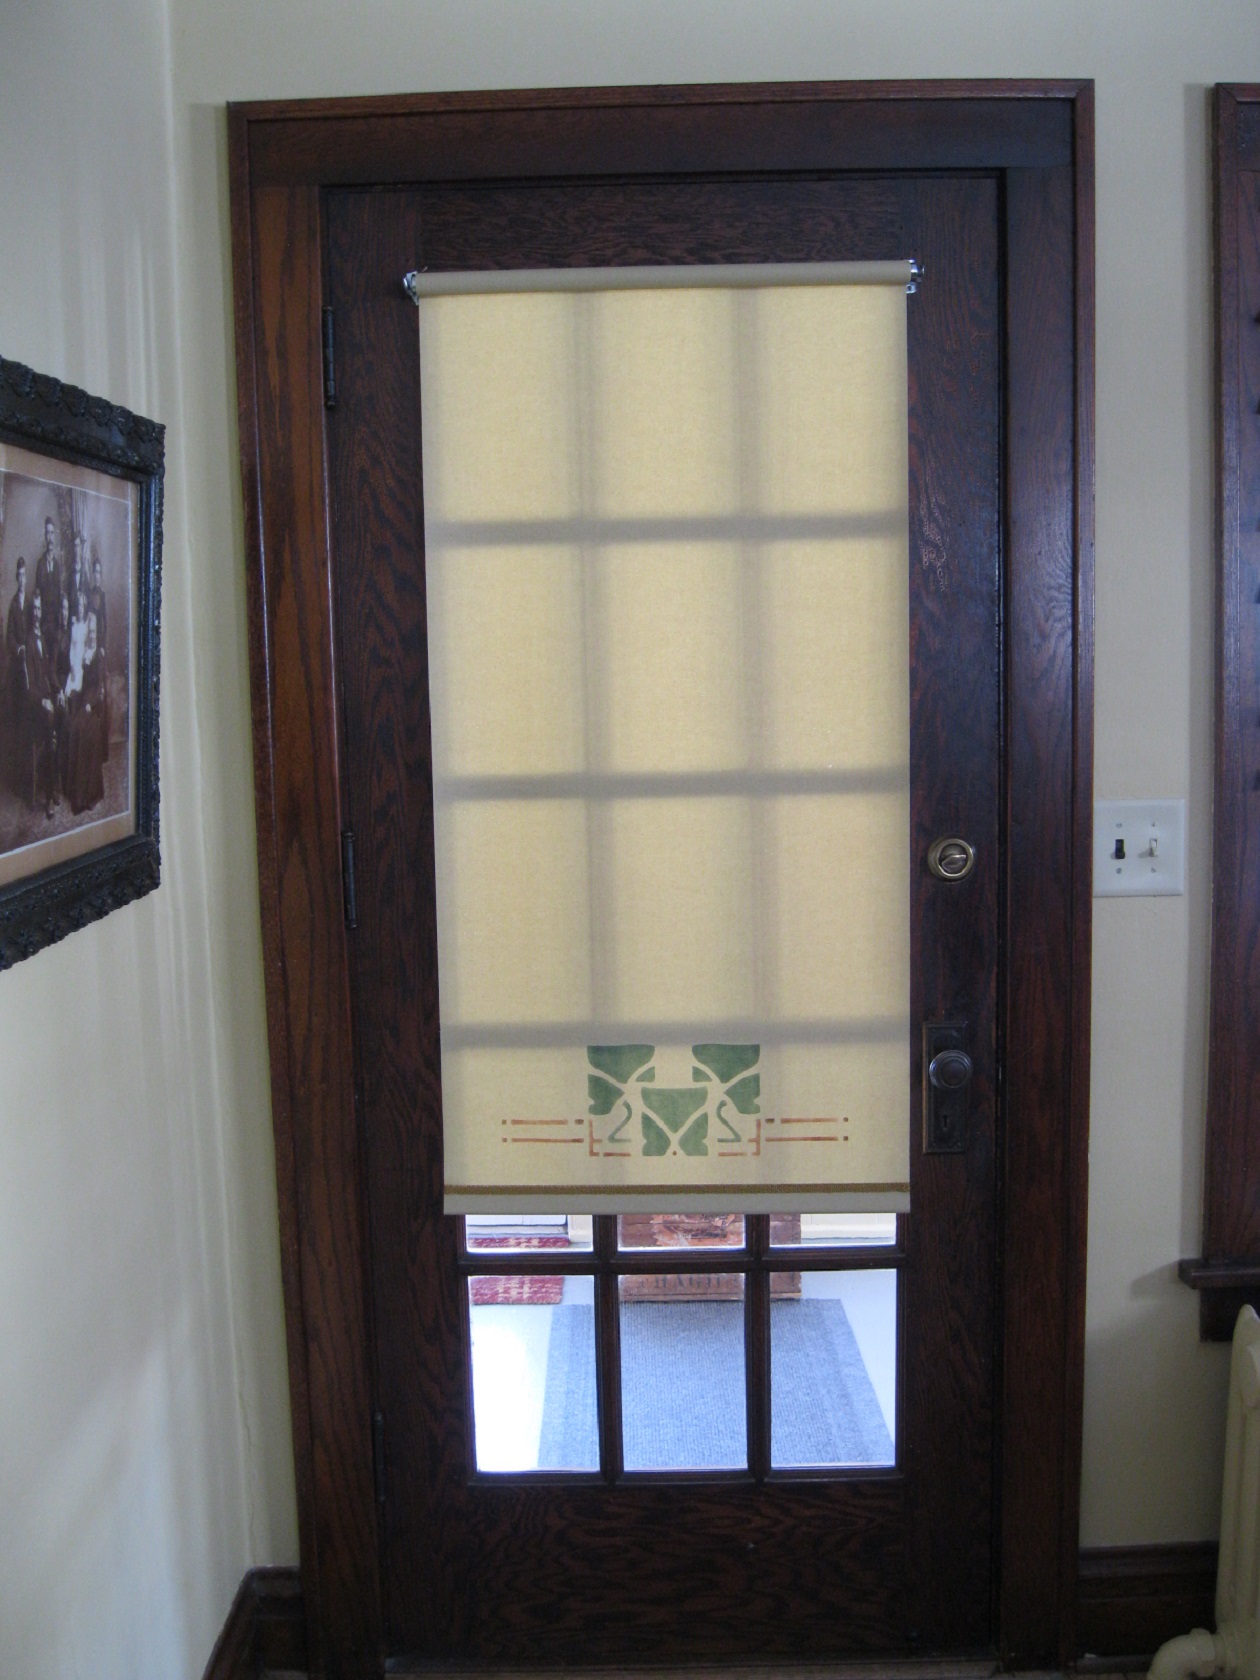 26 Good And Useful Ideas For Front Door Blinds - Interior ...
